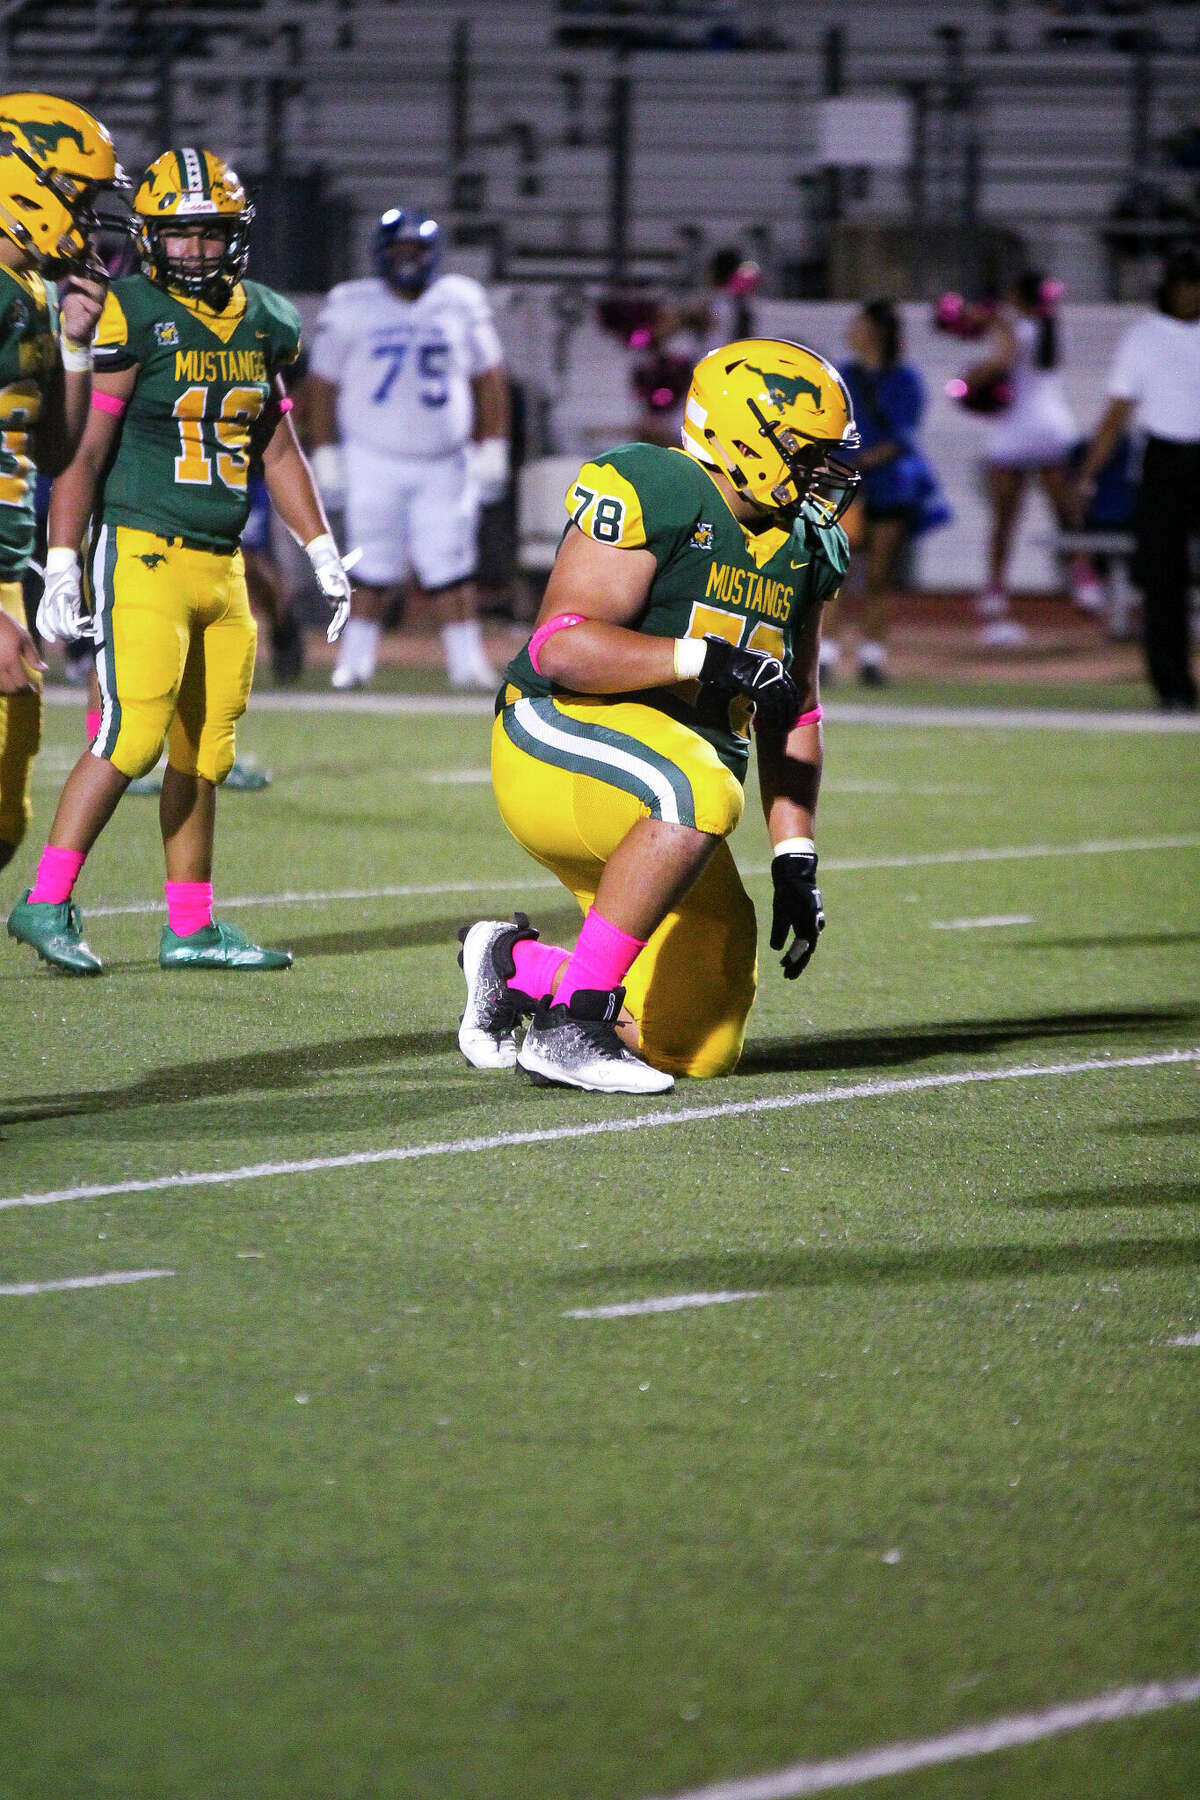 Nixon defensive tackle Ricardo Morales has the ability to dominate games for the Mustangs.